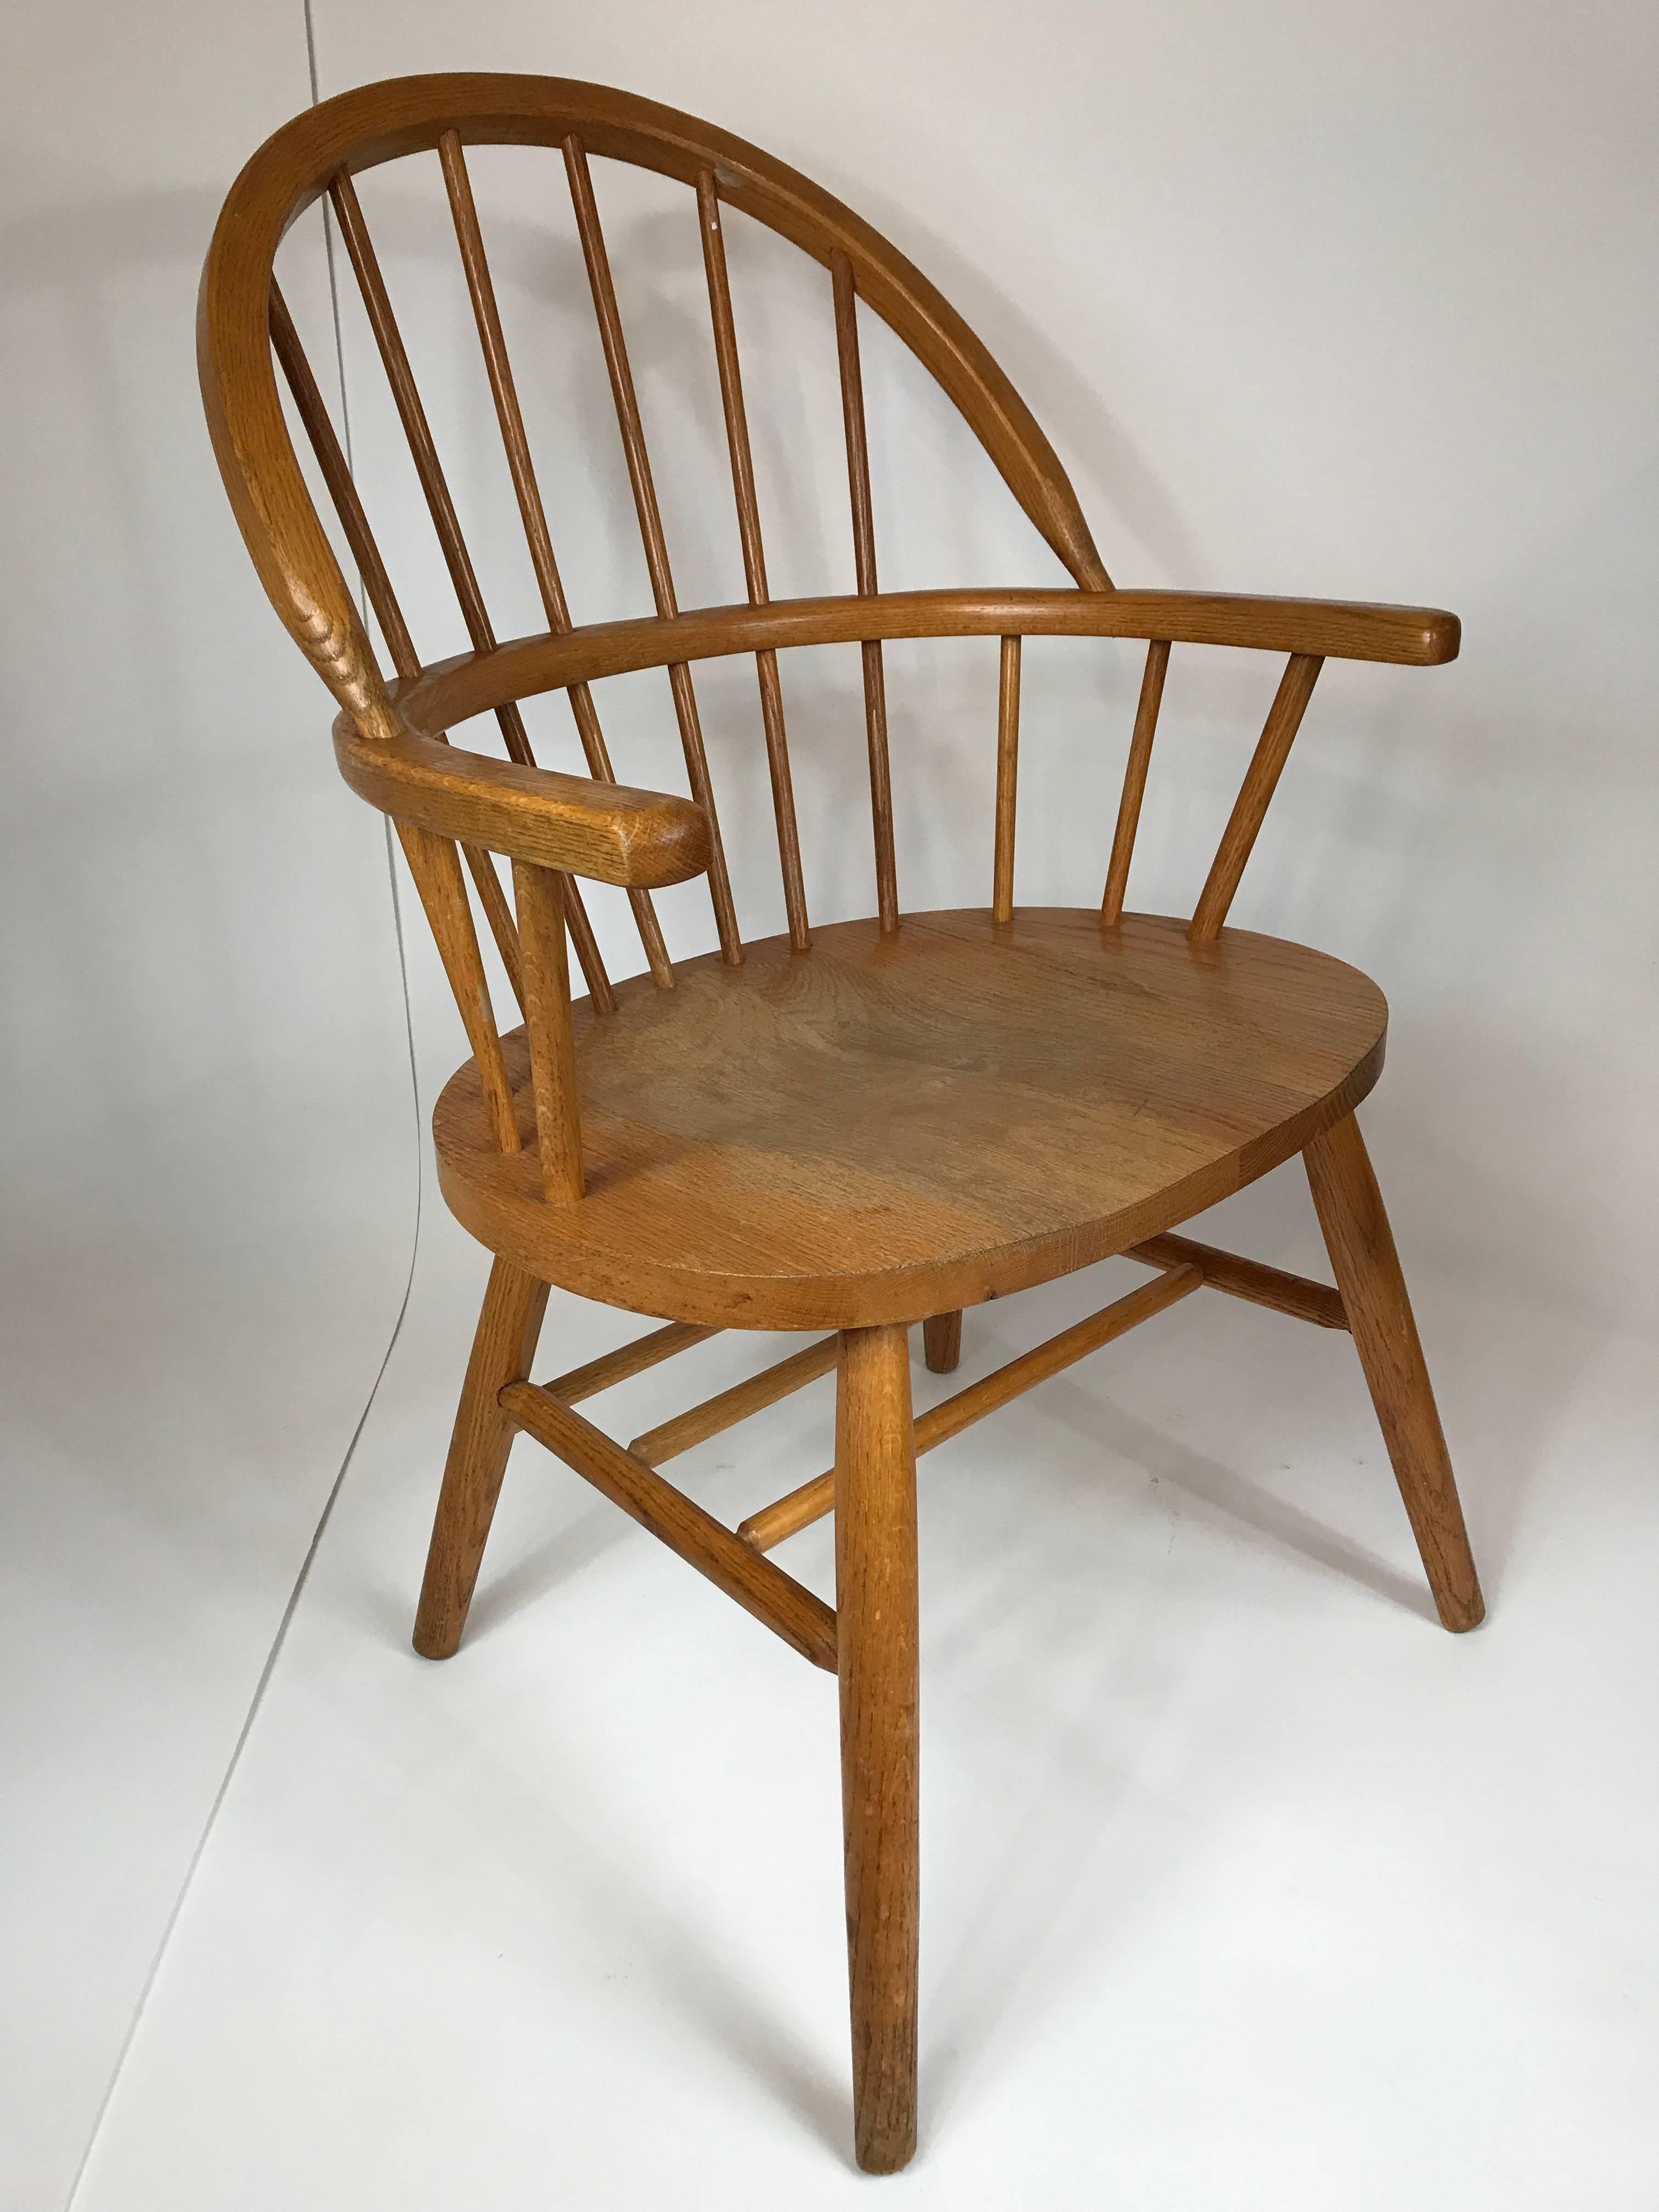 Handsome set of six Danish oak Windsor style dining chairs. Very sturdy construction. 